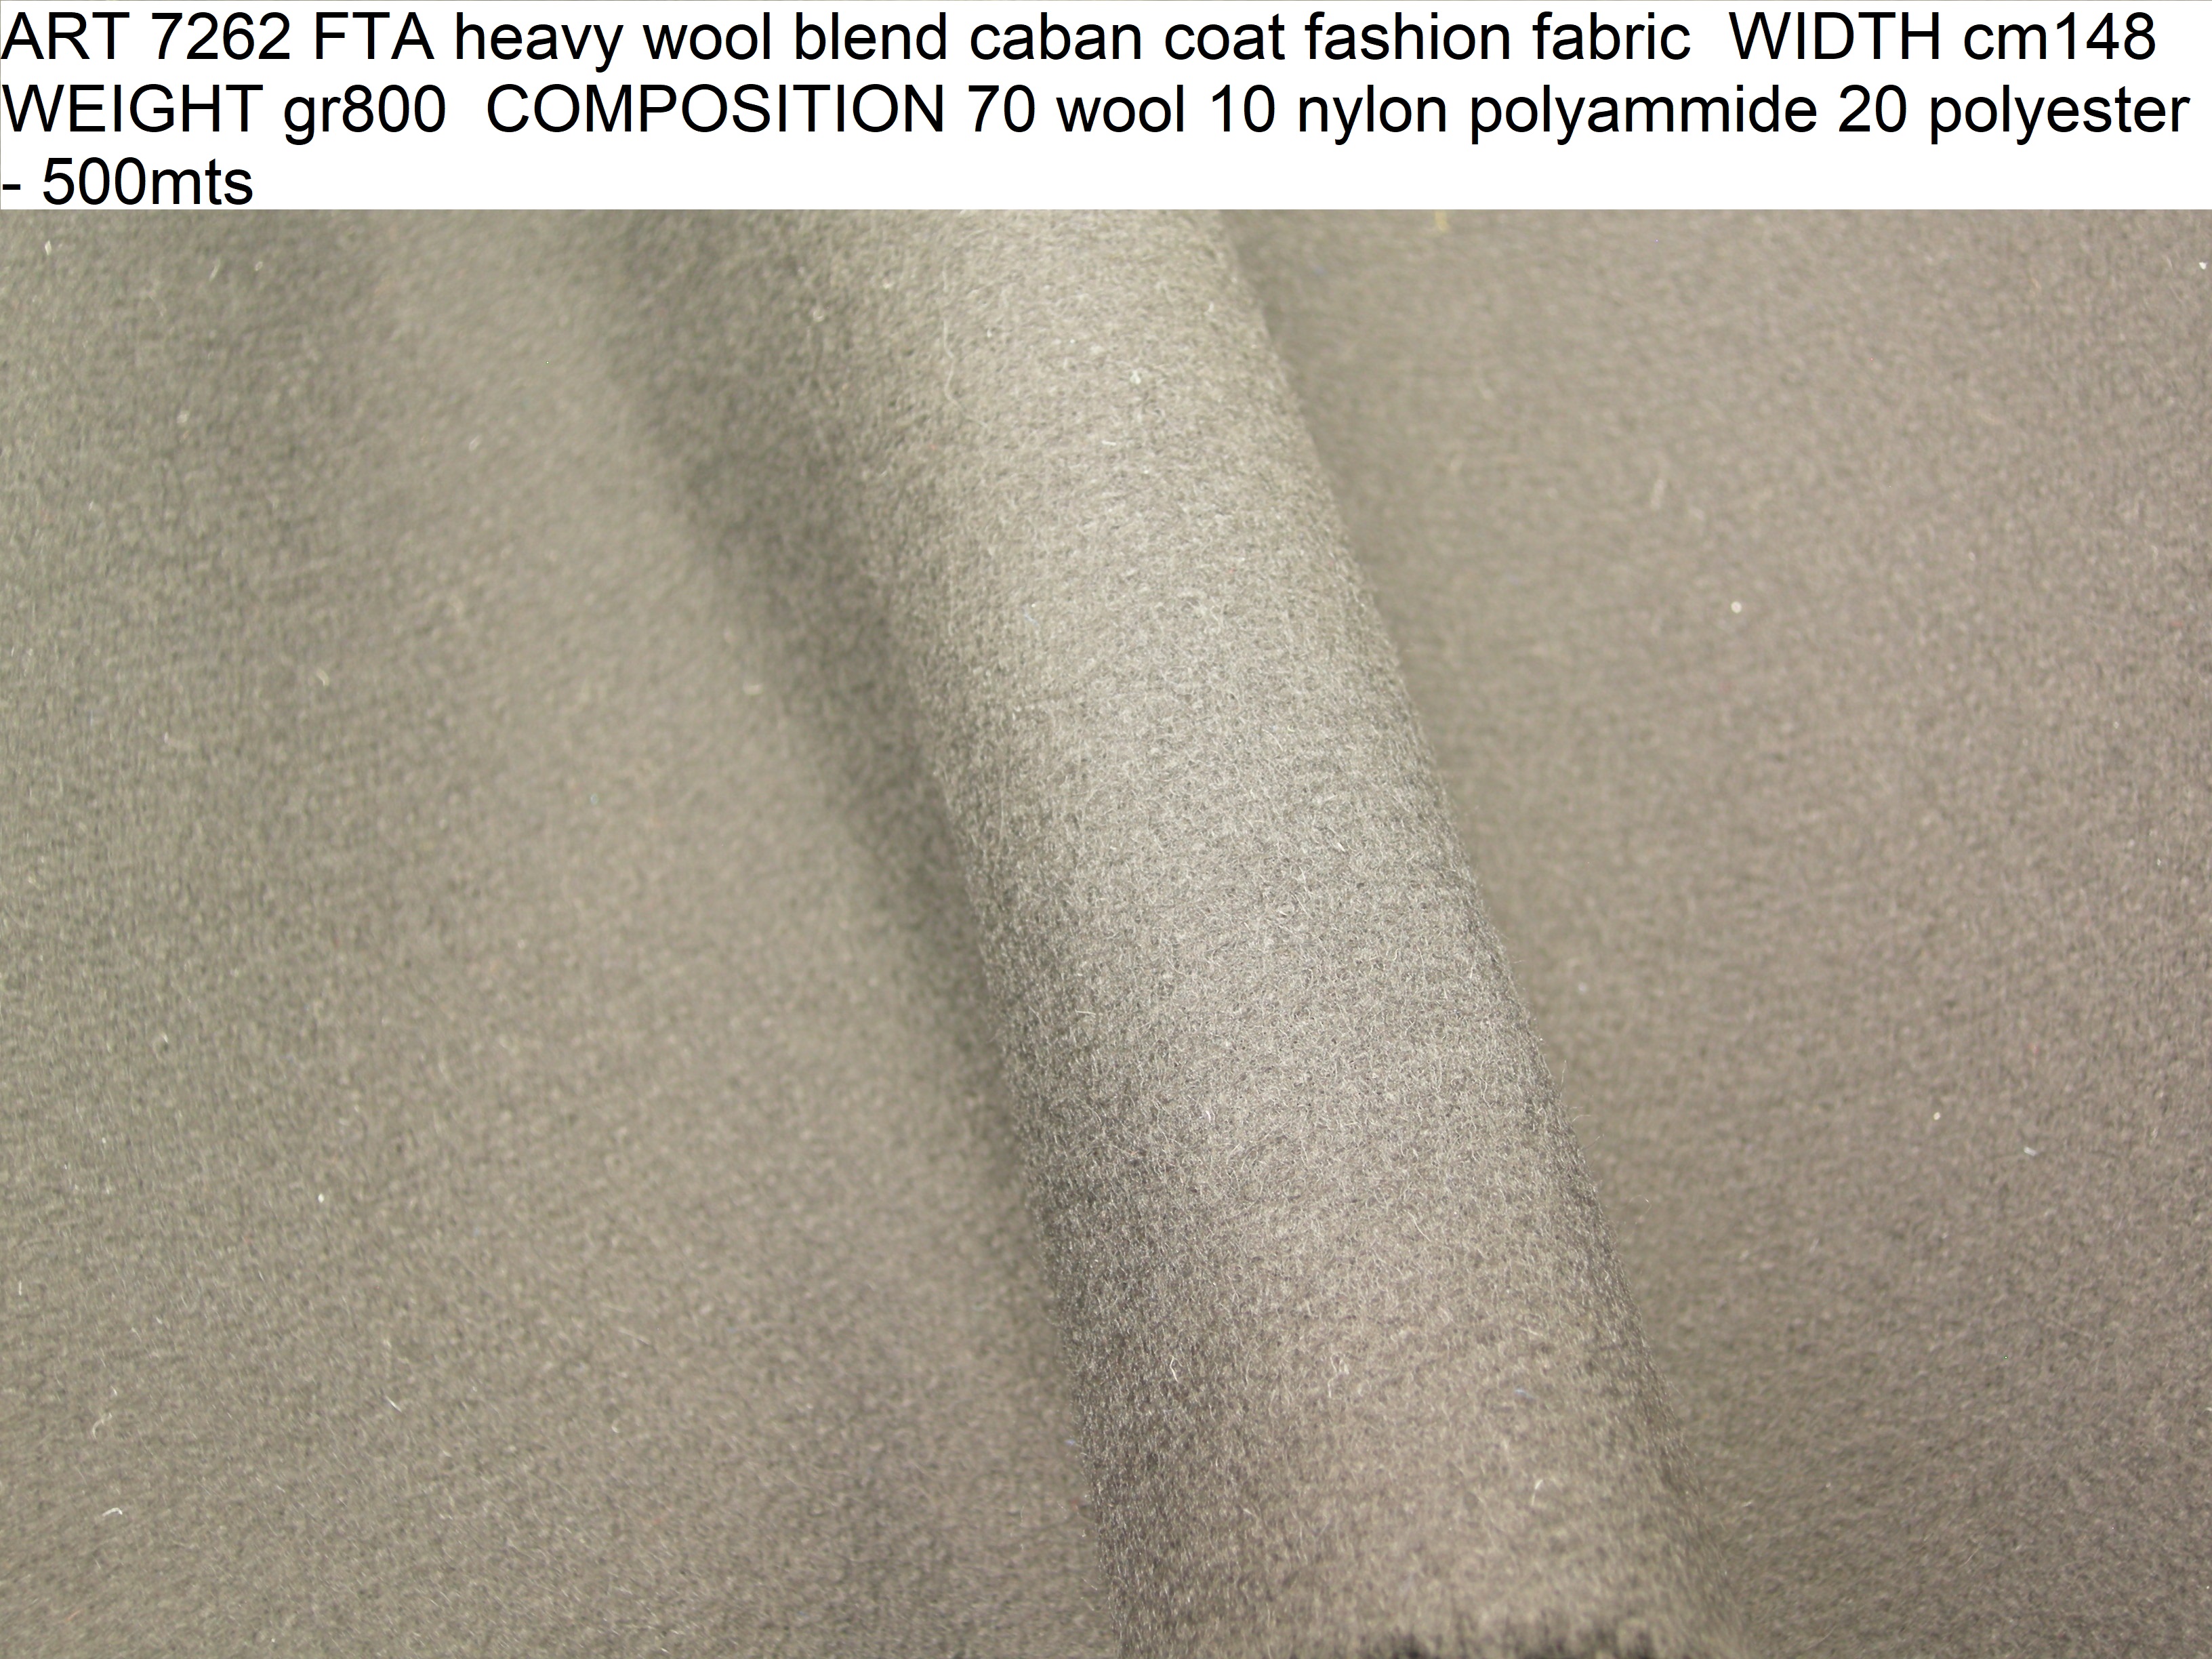 ART 7262 FTA heavy wool blend caban coat fashion fabric WIDTH cm148 WEIGHT gr800 COMPOSITION 70 wool 10 nylon polyammide 20 polyester - 500mts